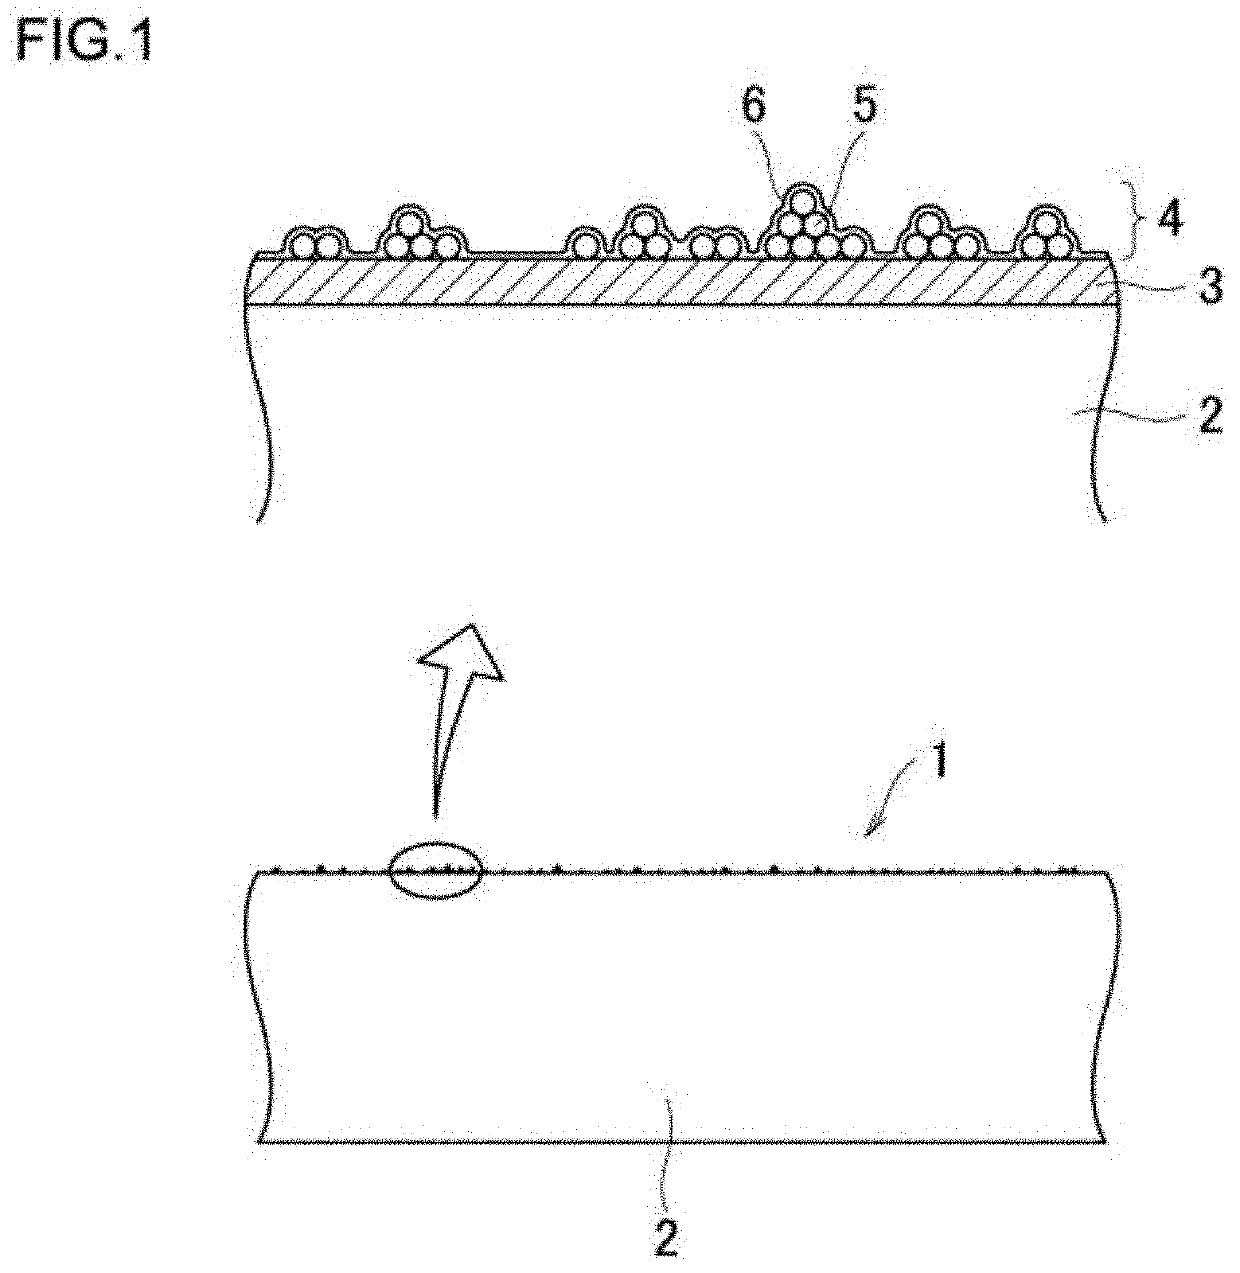 Liquid repellent film or sheet, and packaging material using same